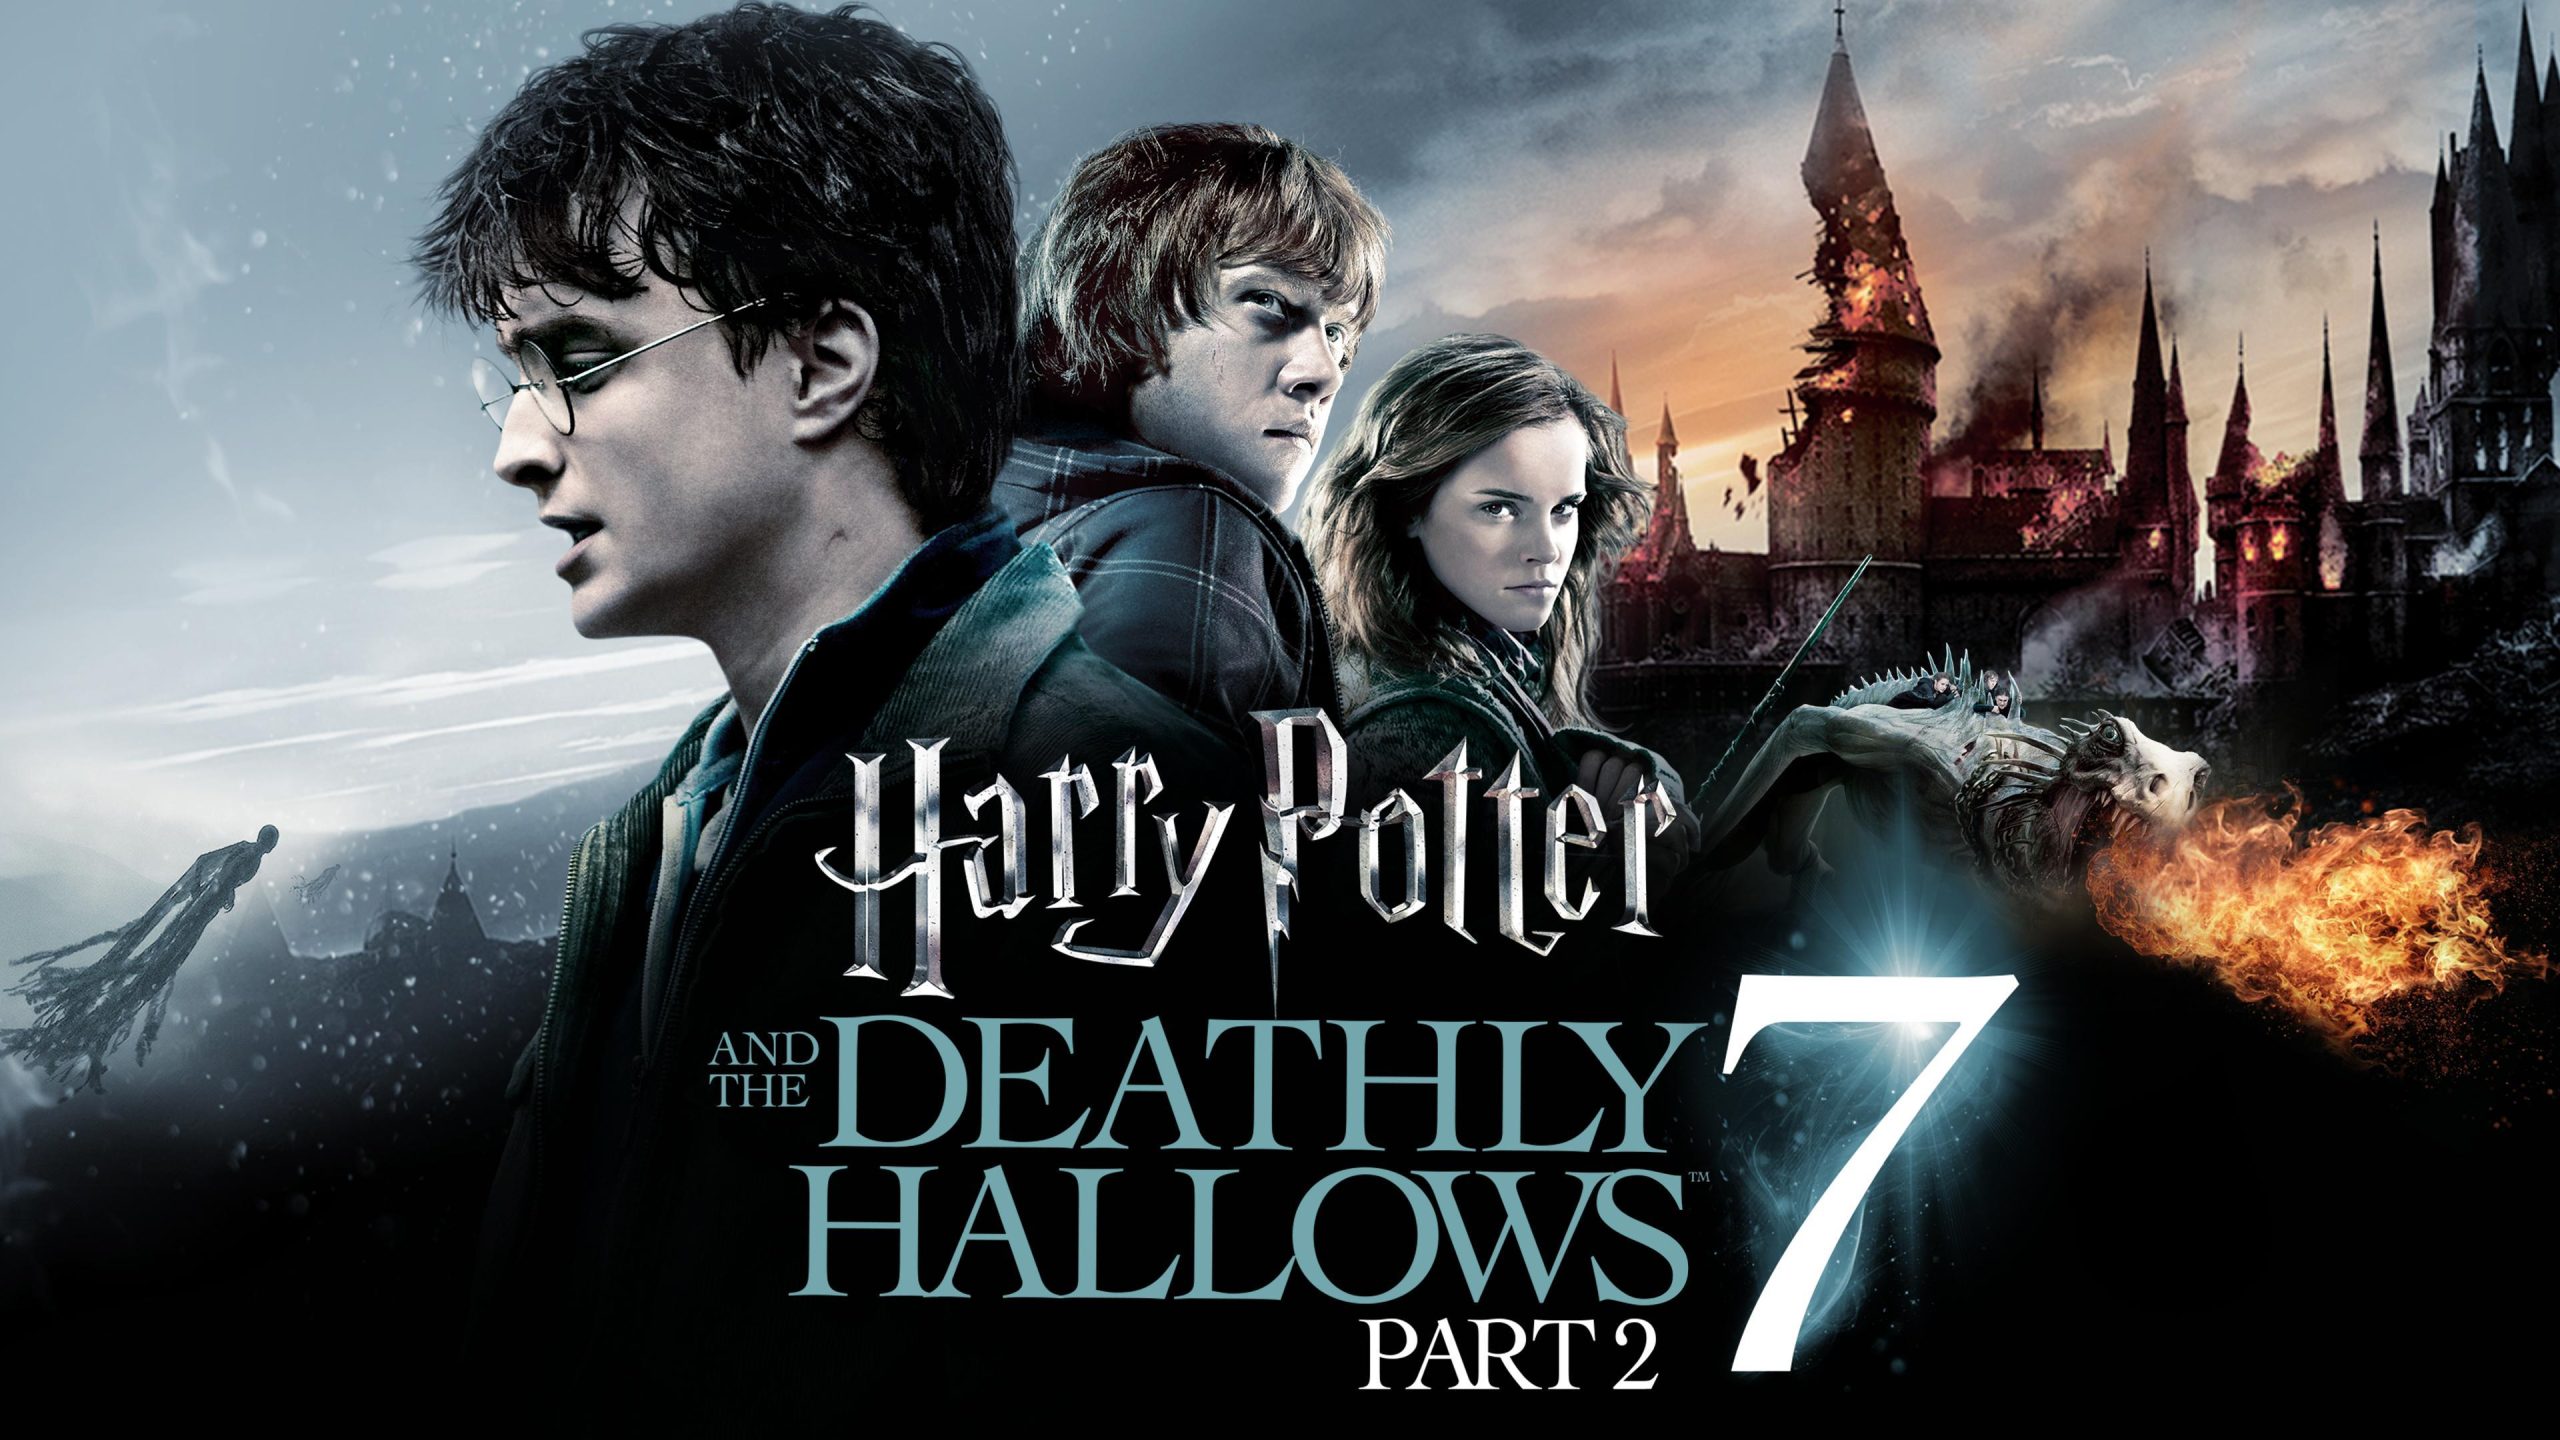 Deathly Hallows Part 2